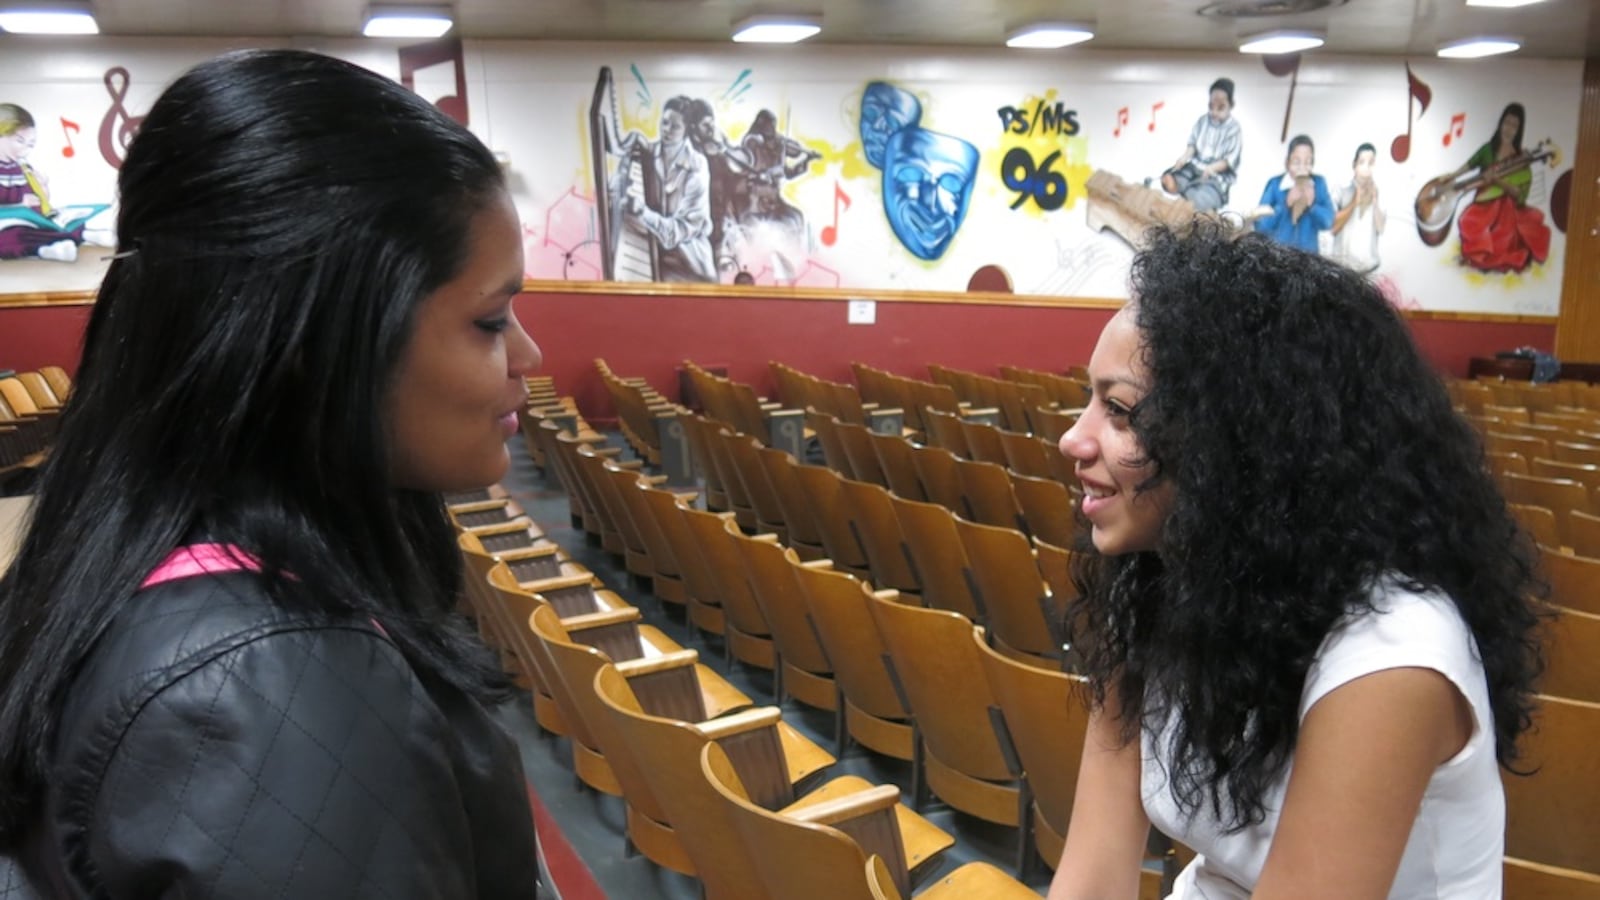 Dolores Gonzalez, left, with her eighth grade daughter, Sanaya, in the P.S./M.S. 96 auditorium in East Harlem